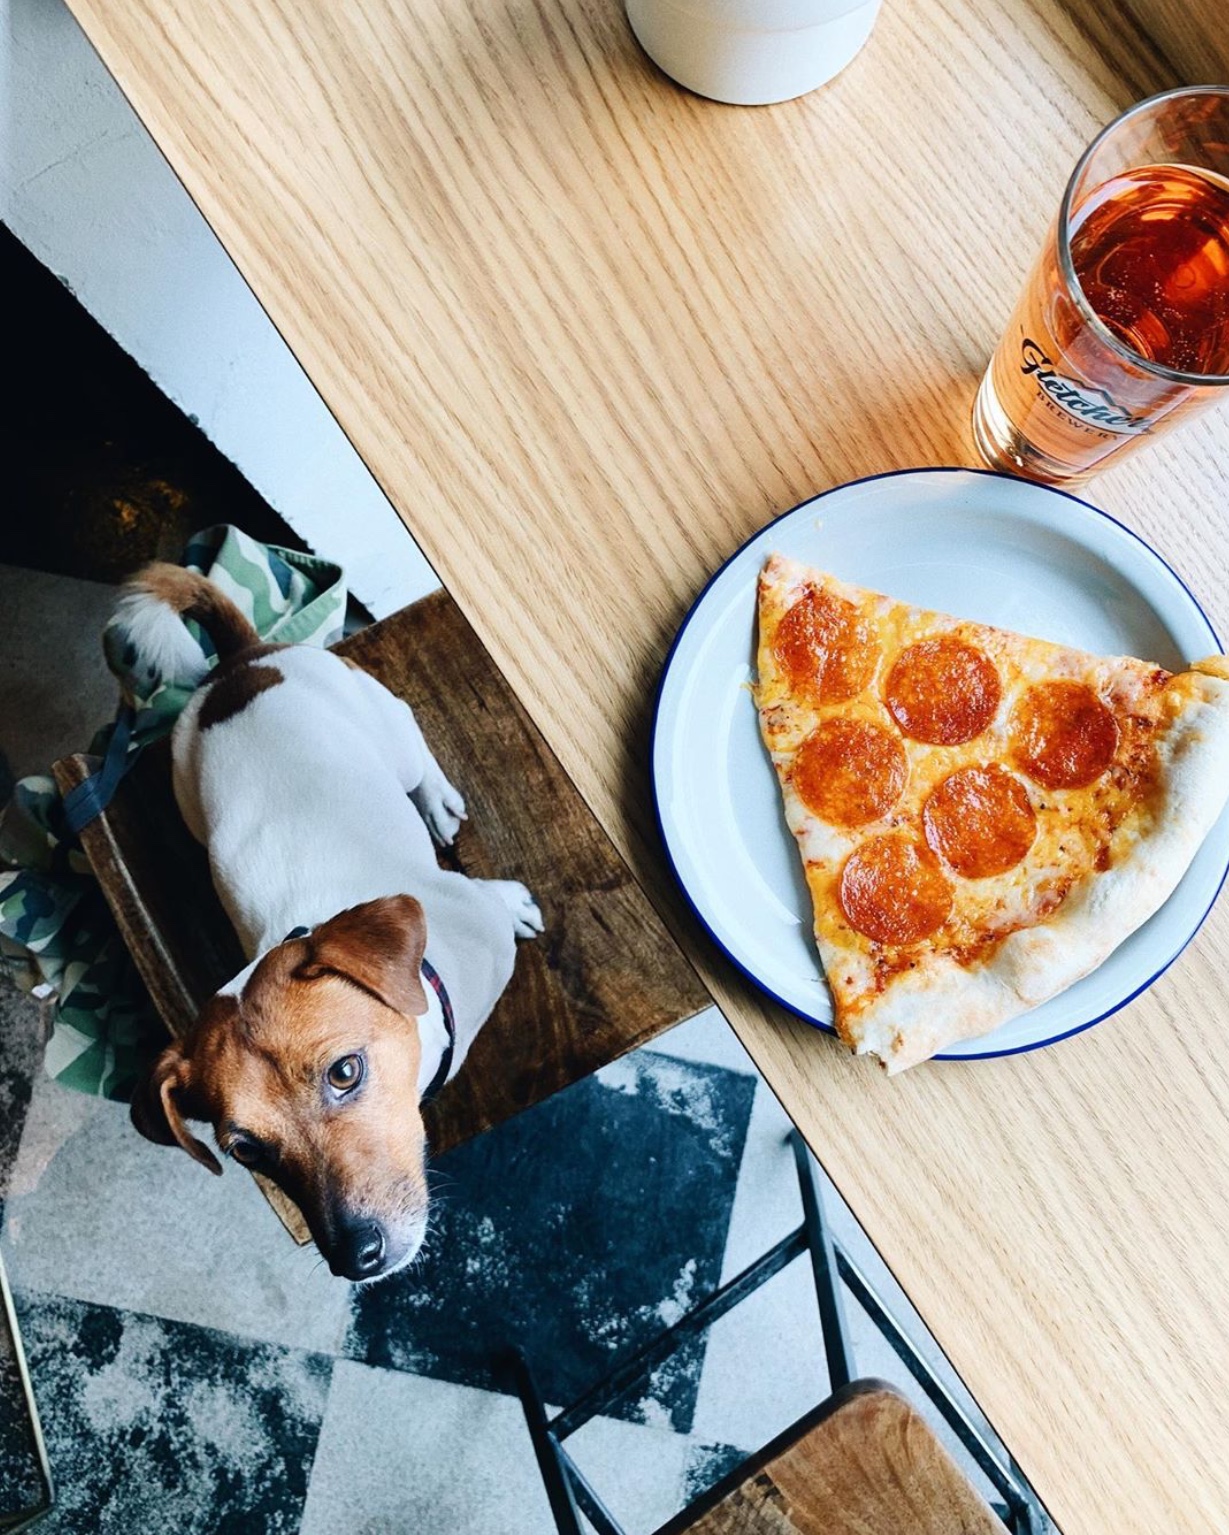 Jack Russell Terrier siting on the chair next to table with a slice of pizza on a plate on top of the table